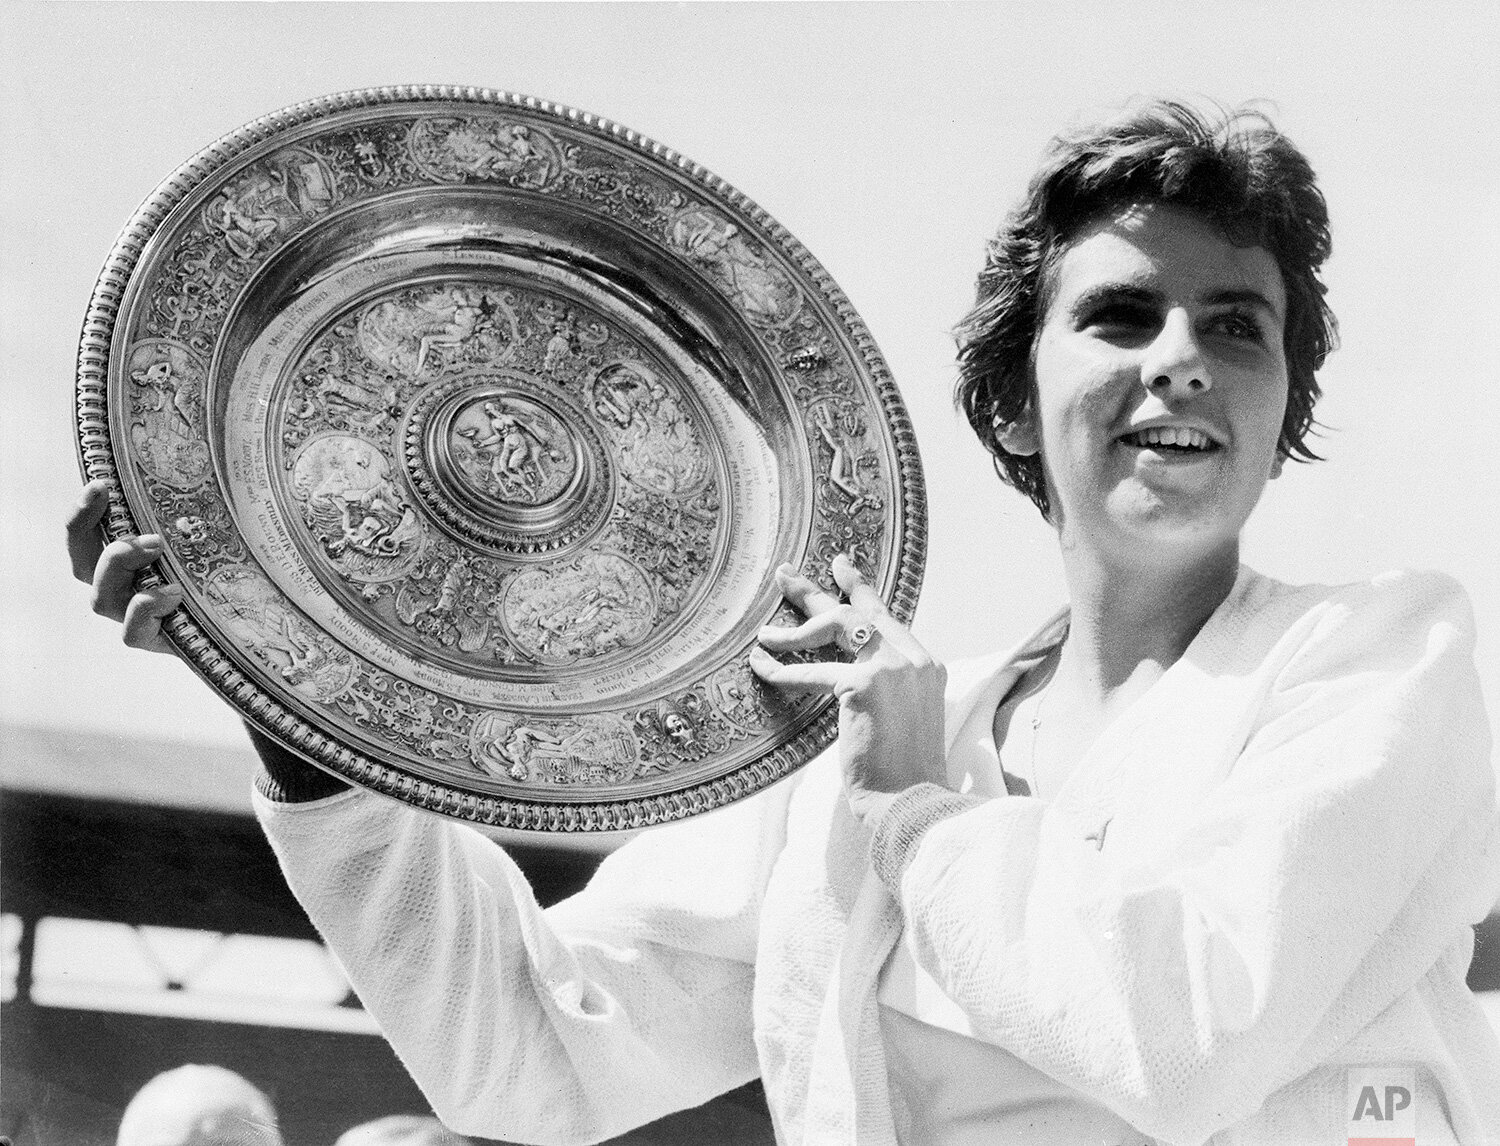  Maria Bueno of Brazil holds up the trophy after winning the women's singles final in the All-England Lawn Tennis championships at Wimbledon, July 4, 1959.  (AP Photo) 